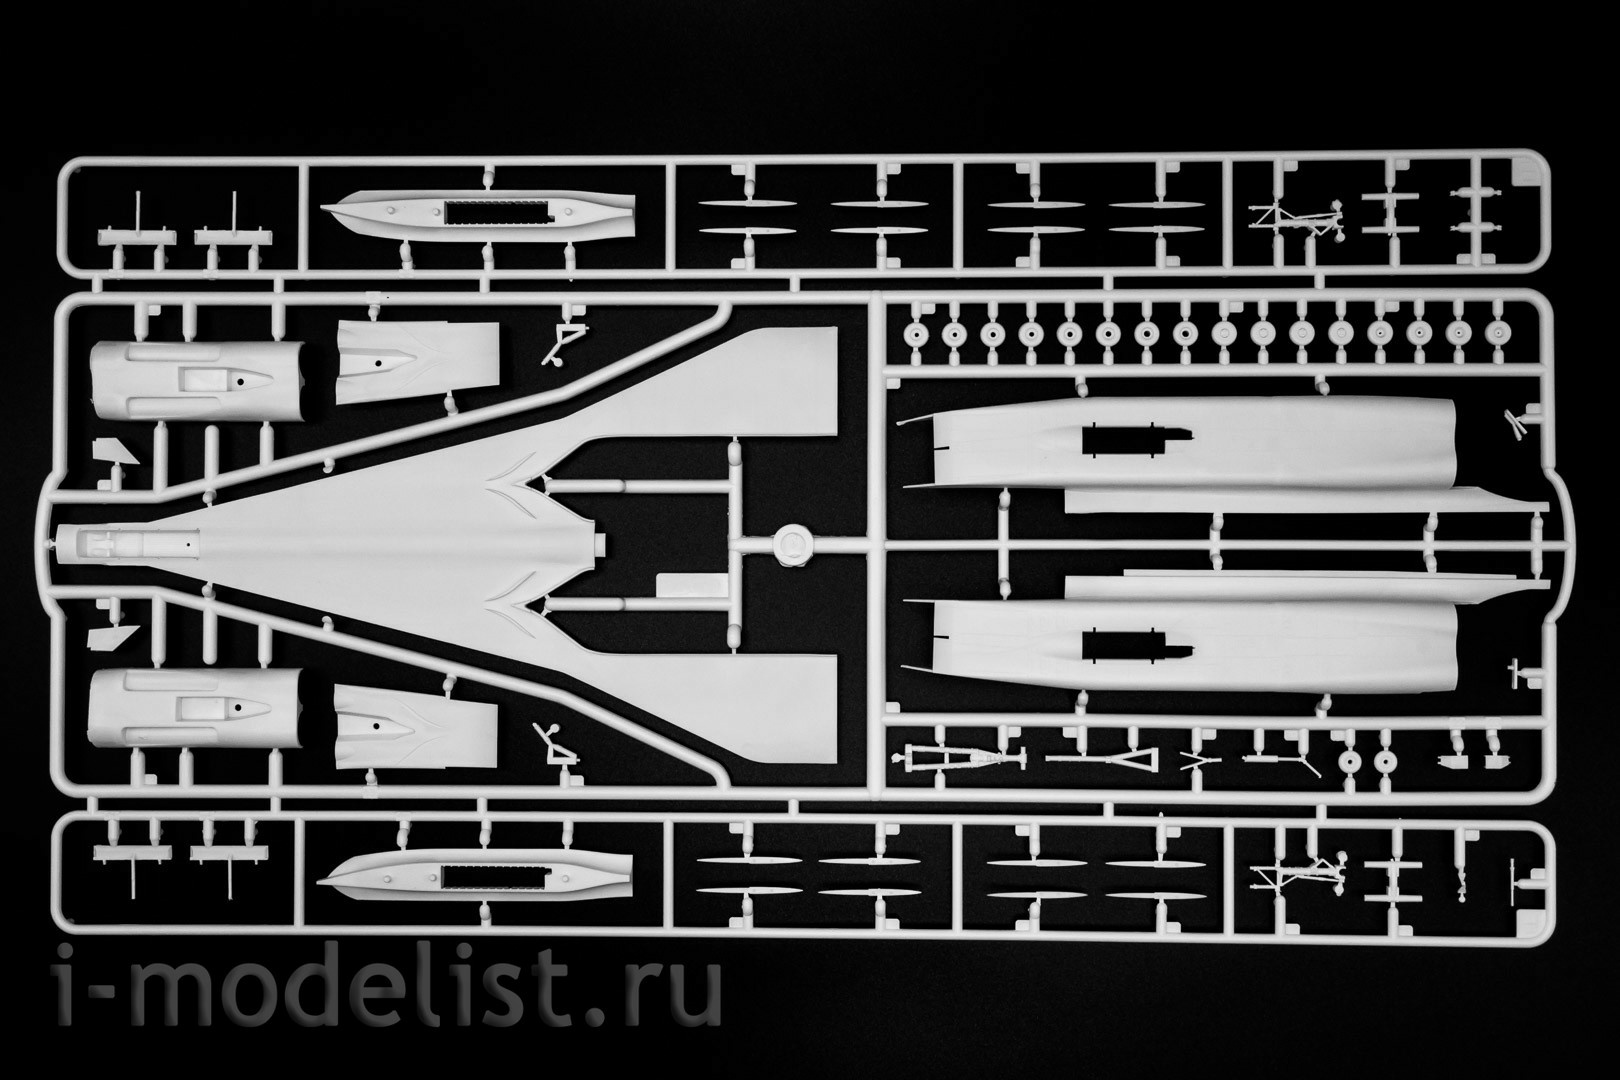 ICM 14402 1/144 scales of the Tu-144D Soviet supersonic passenger aircraft